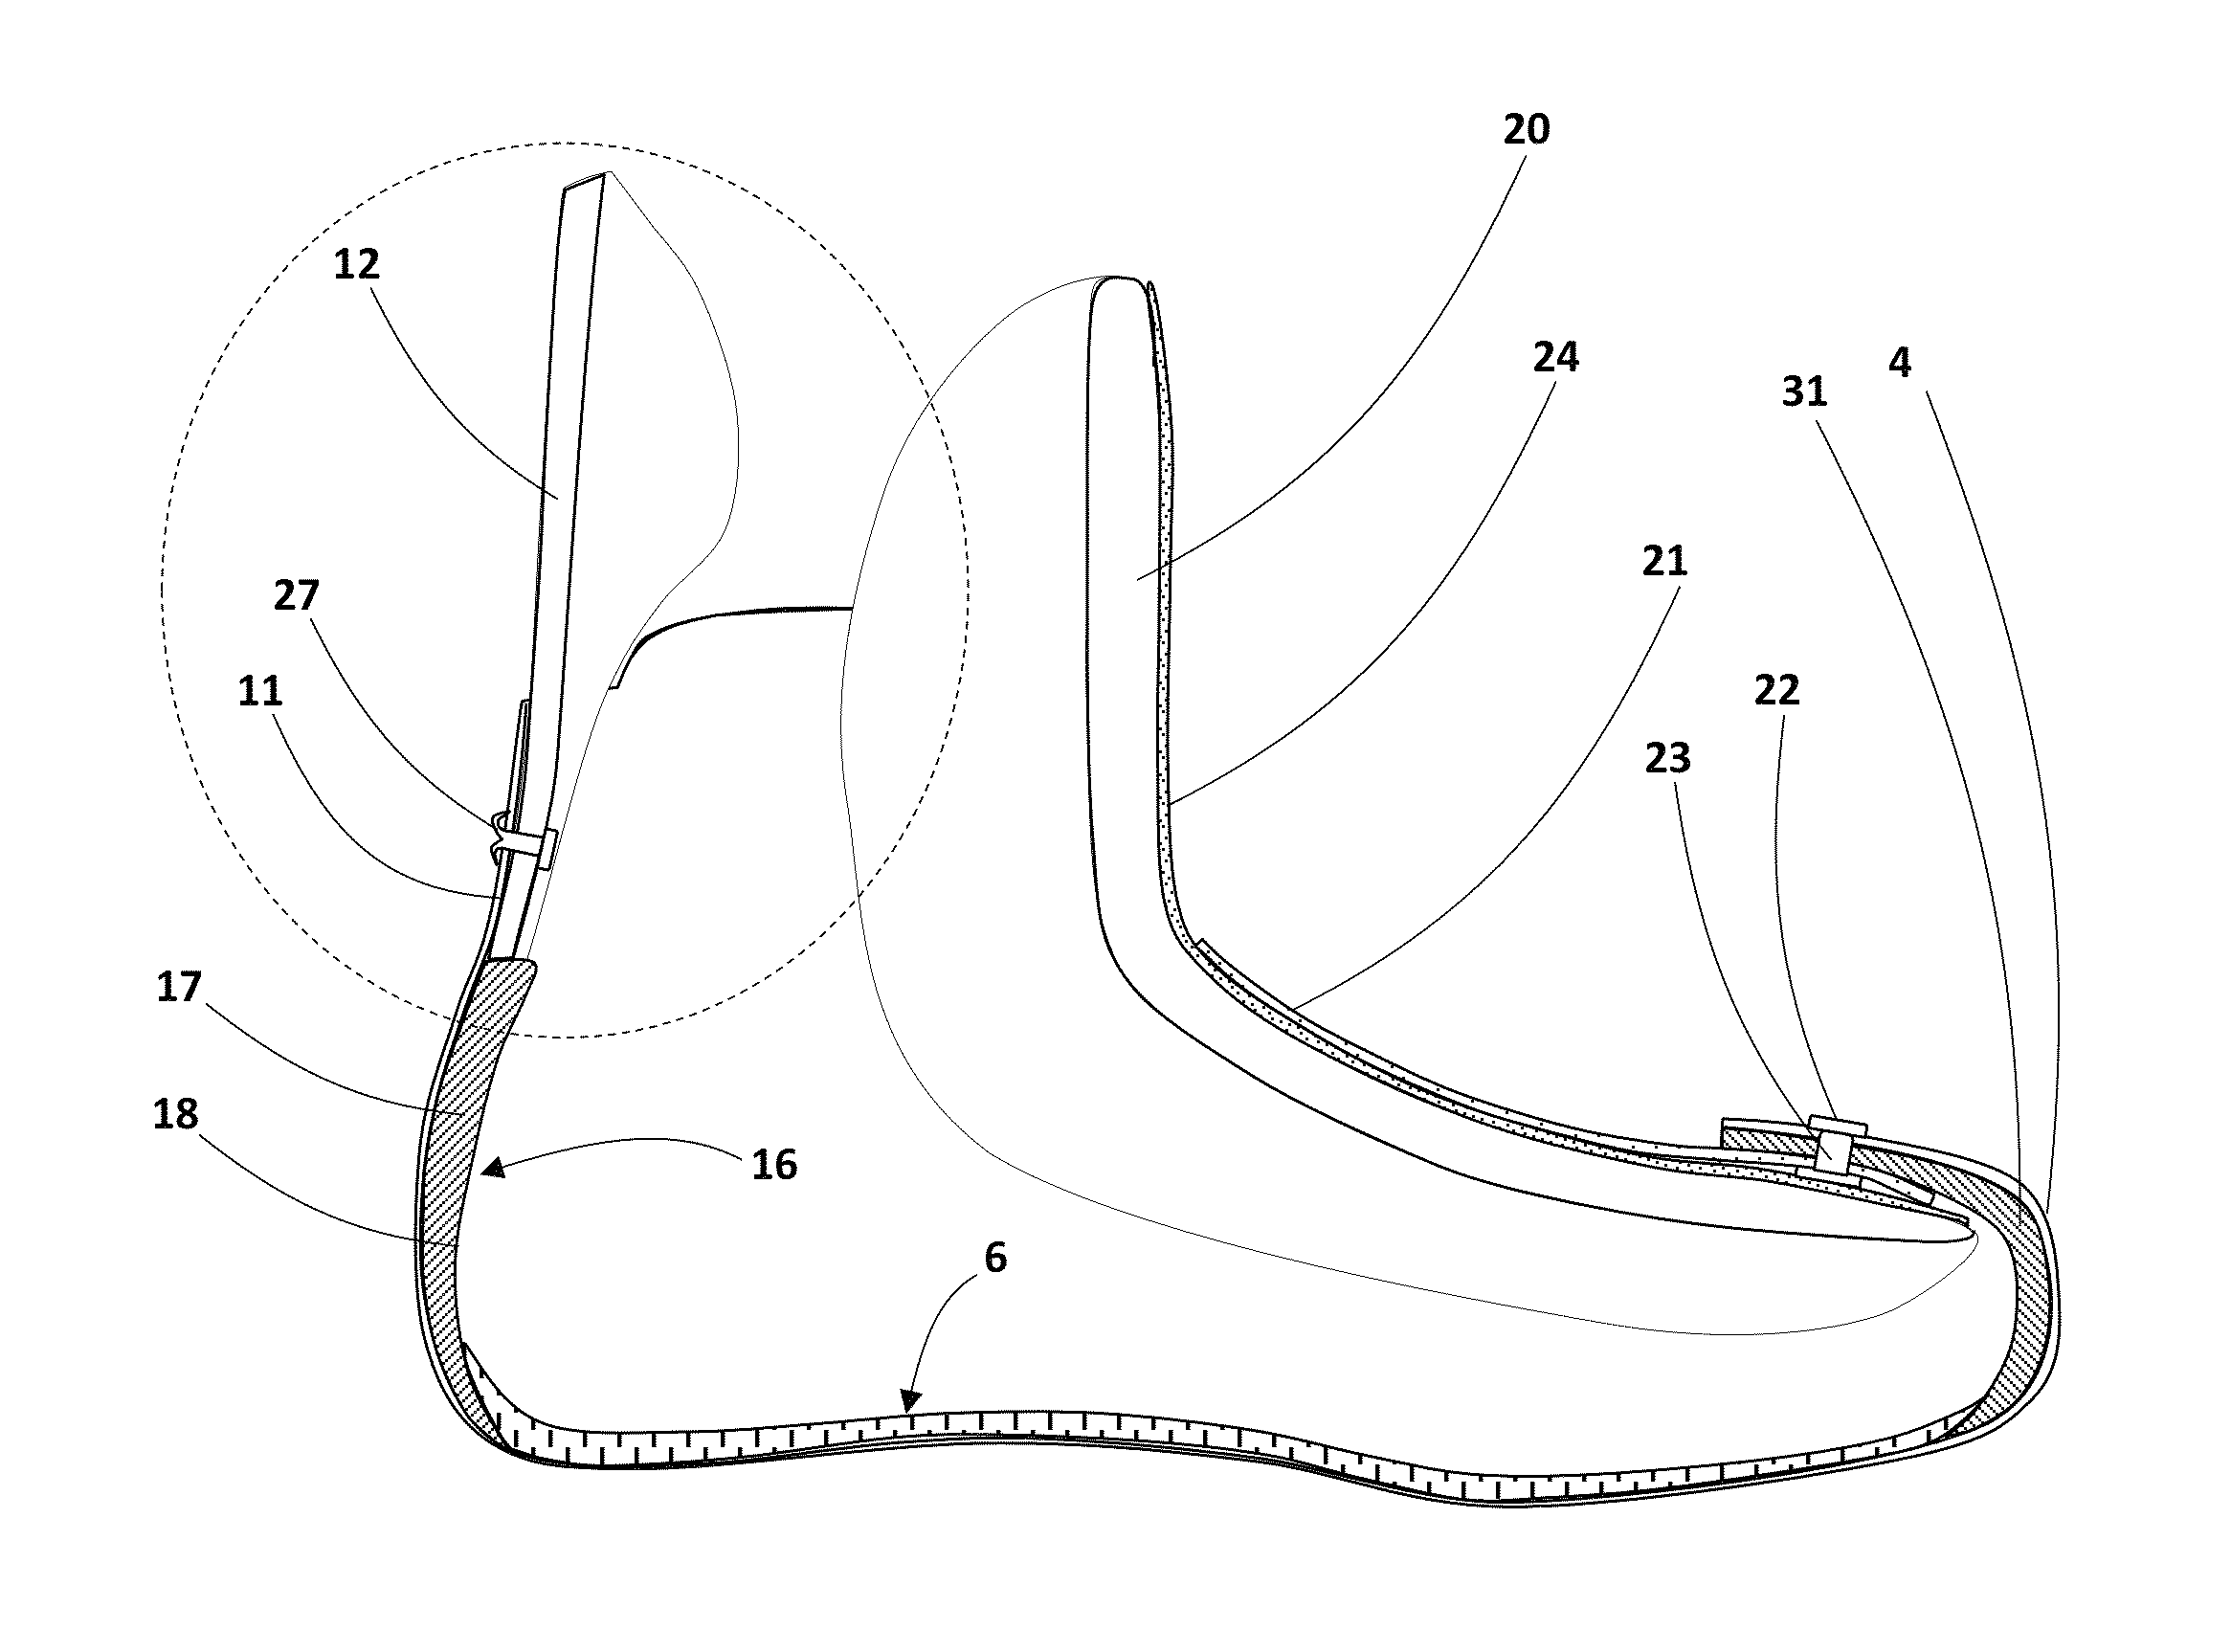 Skate boot with monocoque body